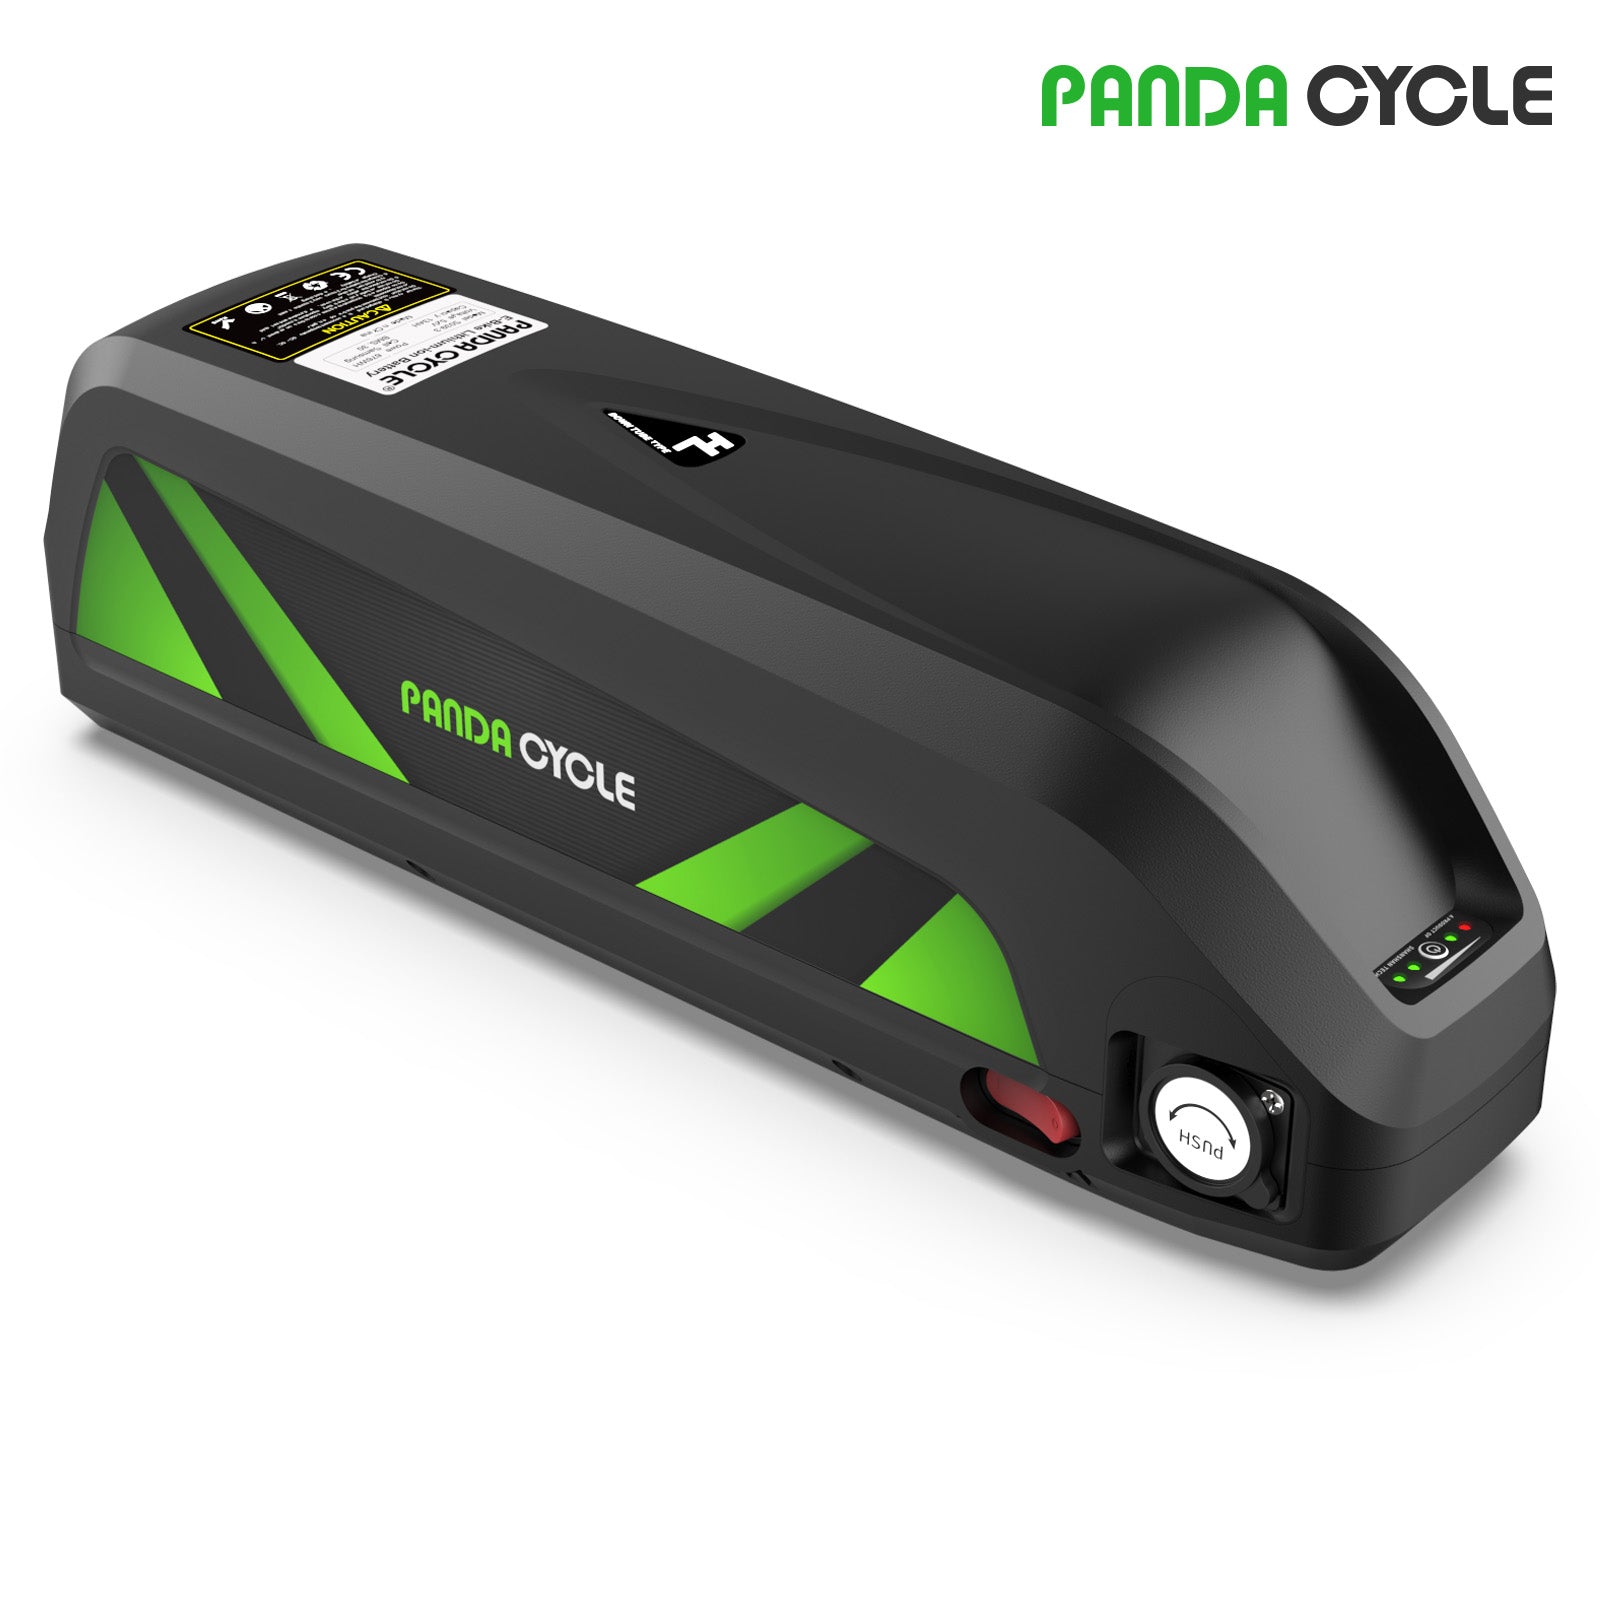 【UK STOCK】Panda Cycle Hailong-3 S039-3 48V 13Ah BMS30A Li-ion Battery with 4A charger fit for 0-1000w Motor